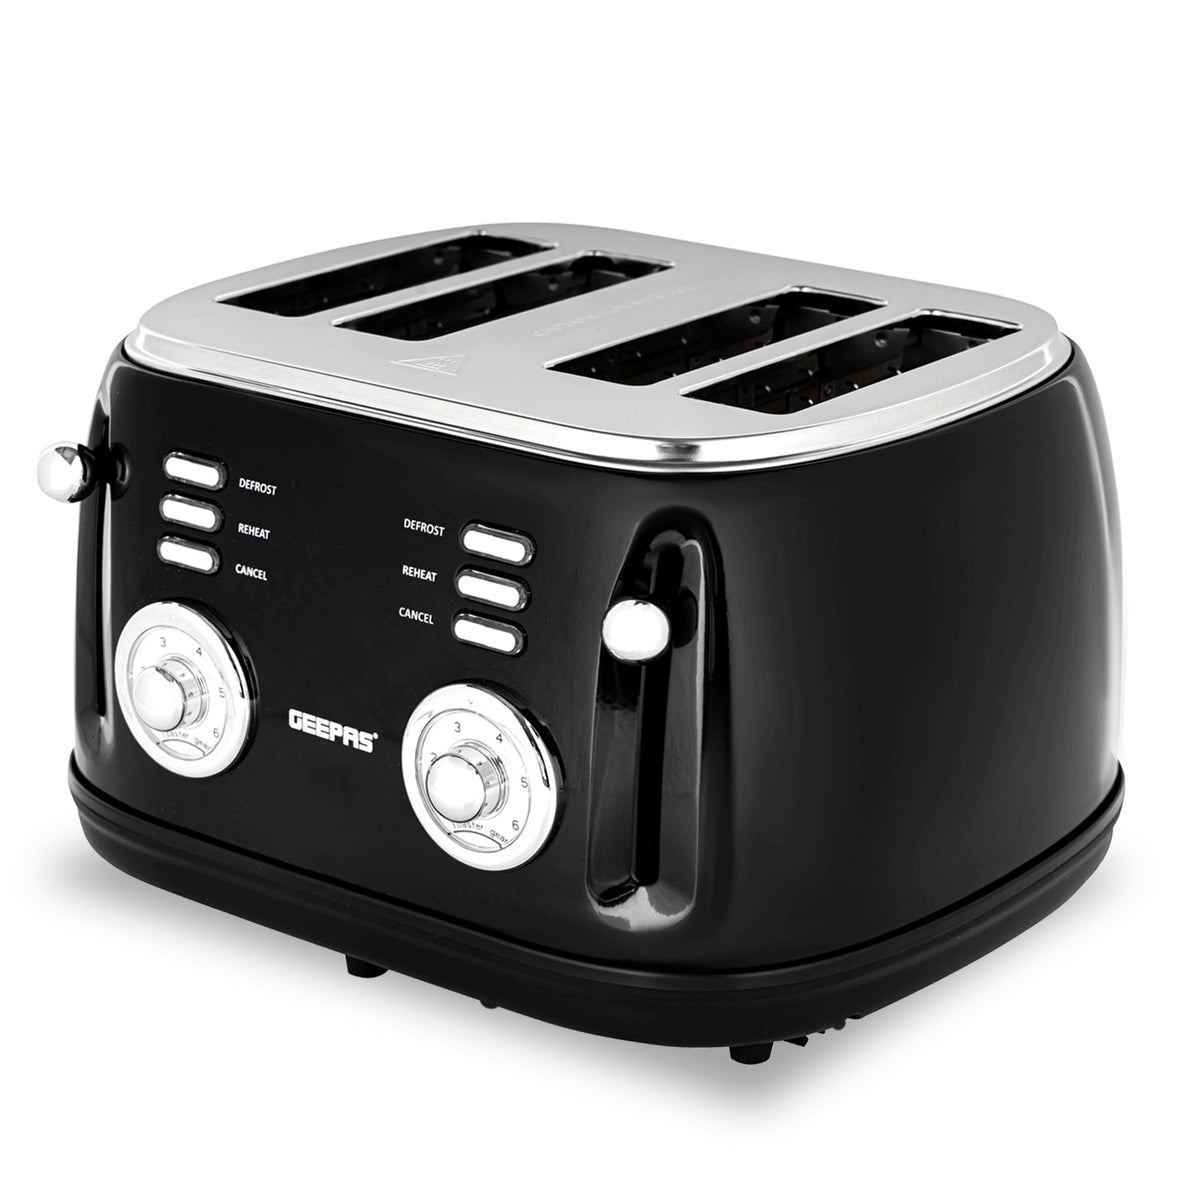 An image of the vintage four slice stainless steel bread toaster.